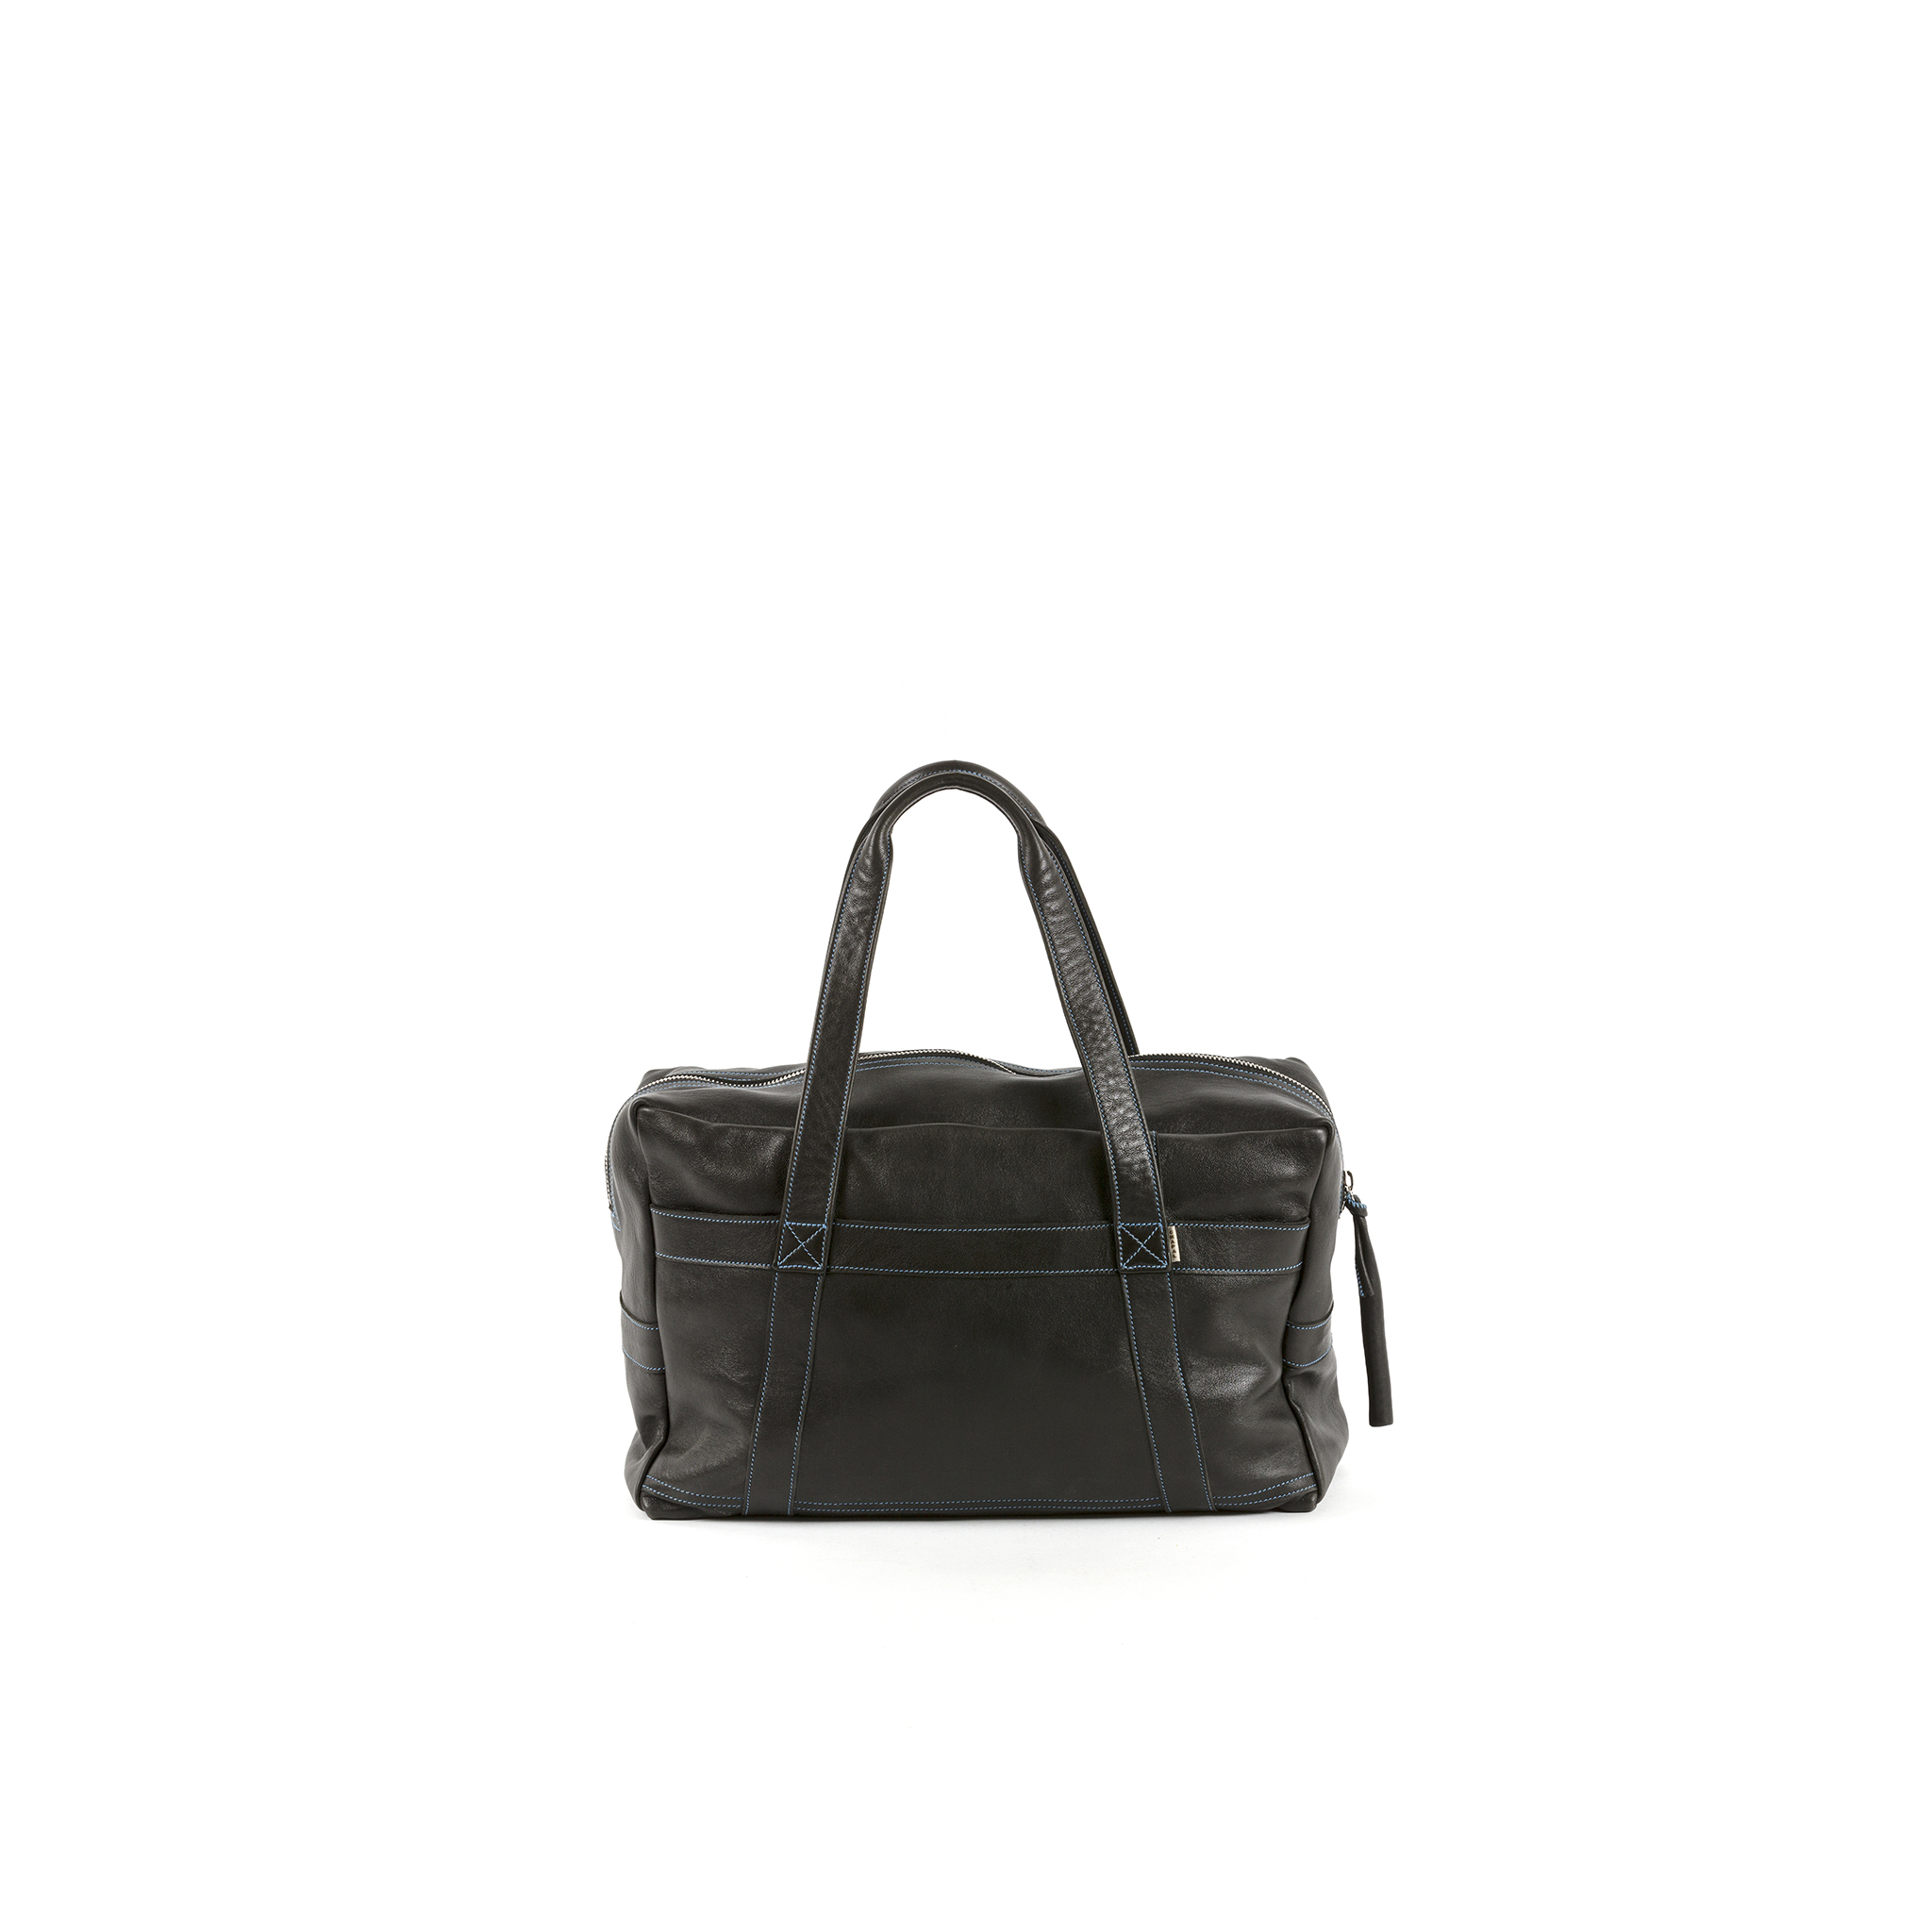 Small Soft Bag - Glossy leather - Black color